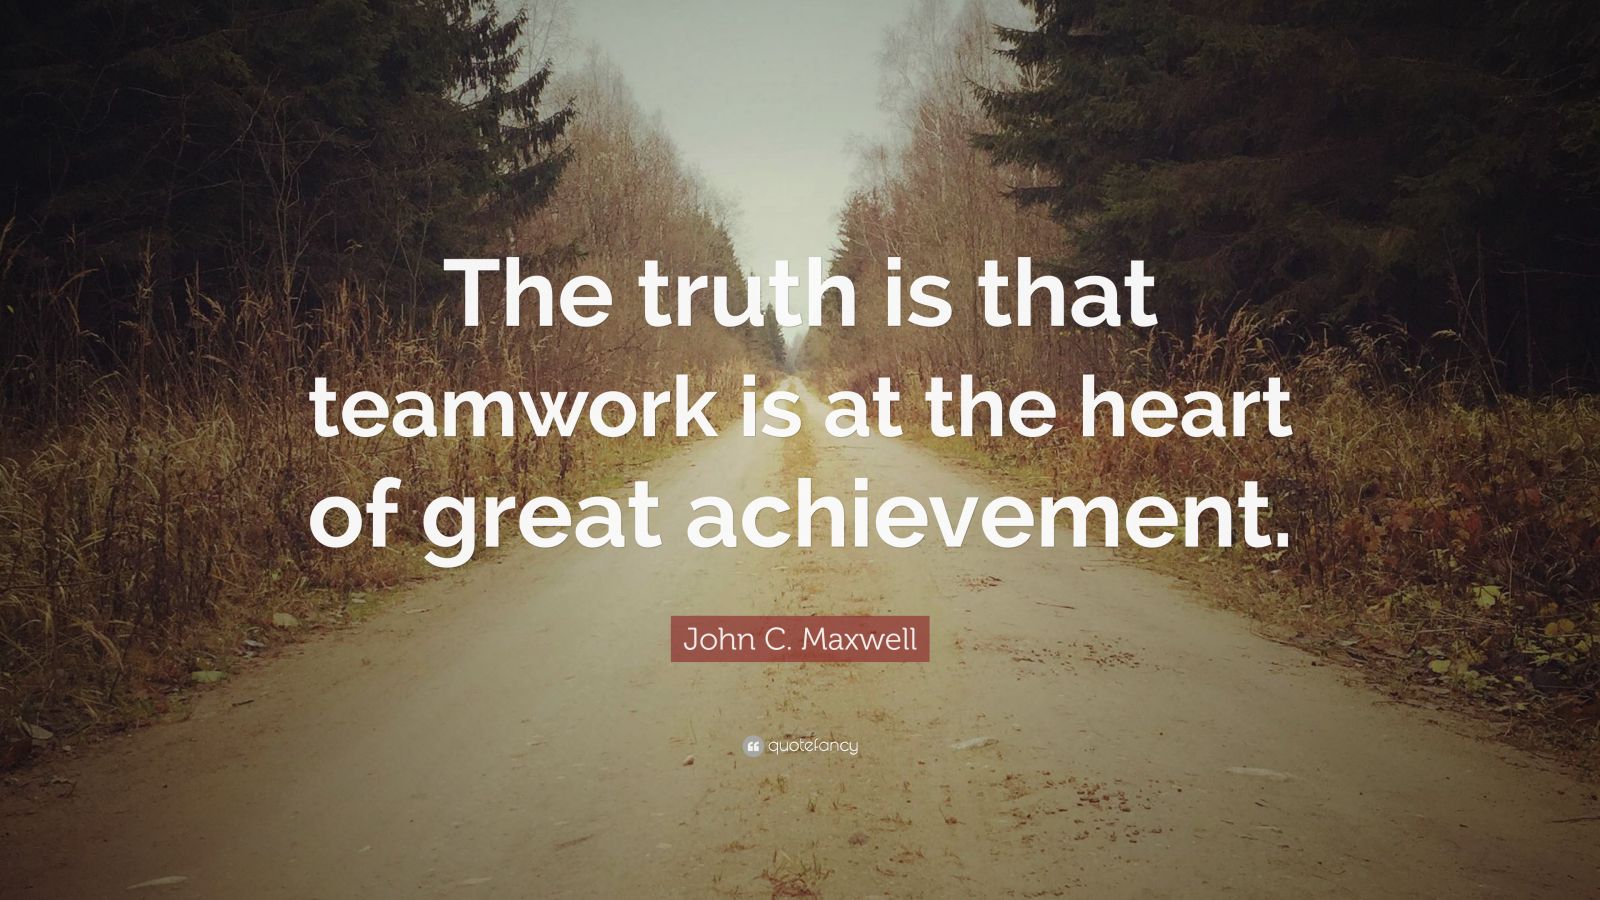 John C. Maxwell Quote: “The truth is that teamwork is at the heart of